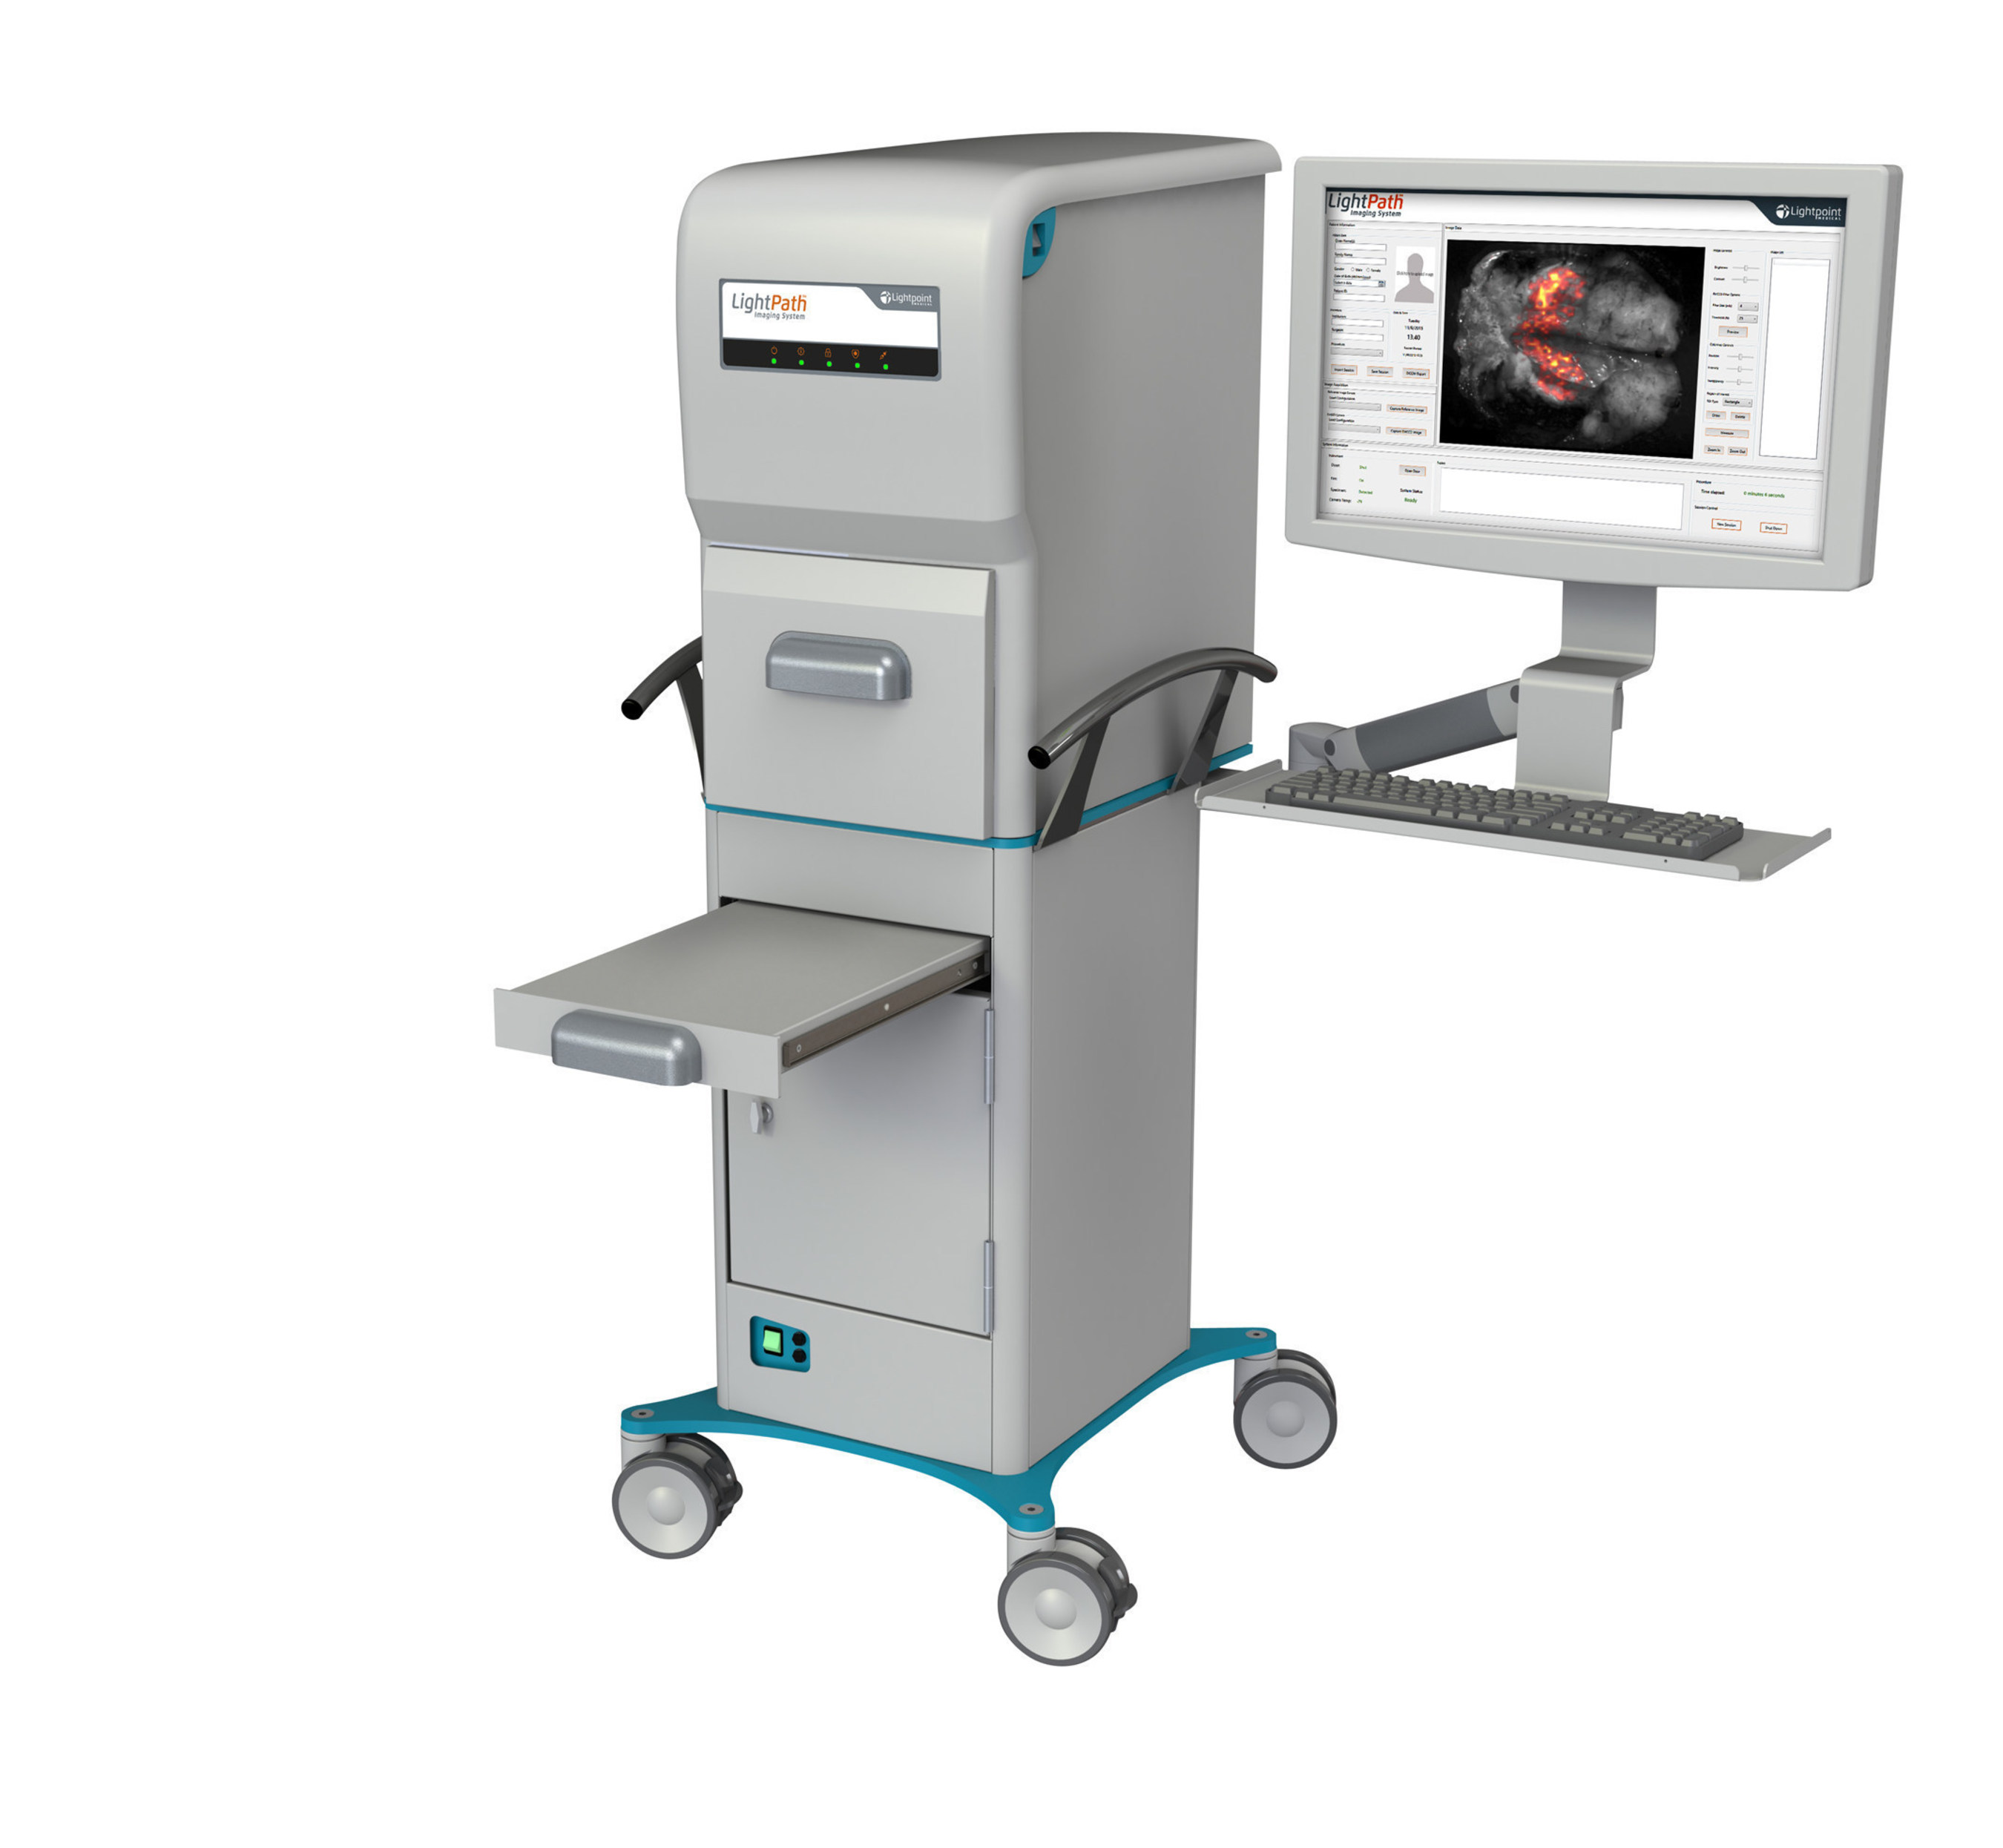 The LightPath(TM) Imaging System is now commercially available in Europe. (PRNewsFoto/Lightpoint Medical) (PRNewsFoto/Lightpoint Medical)